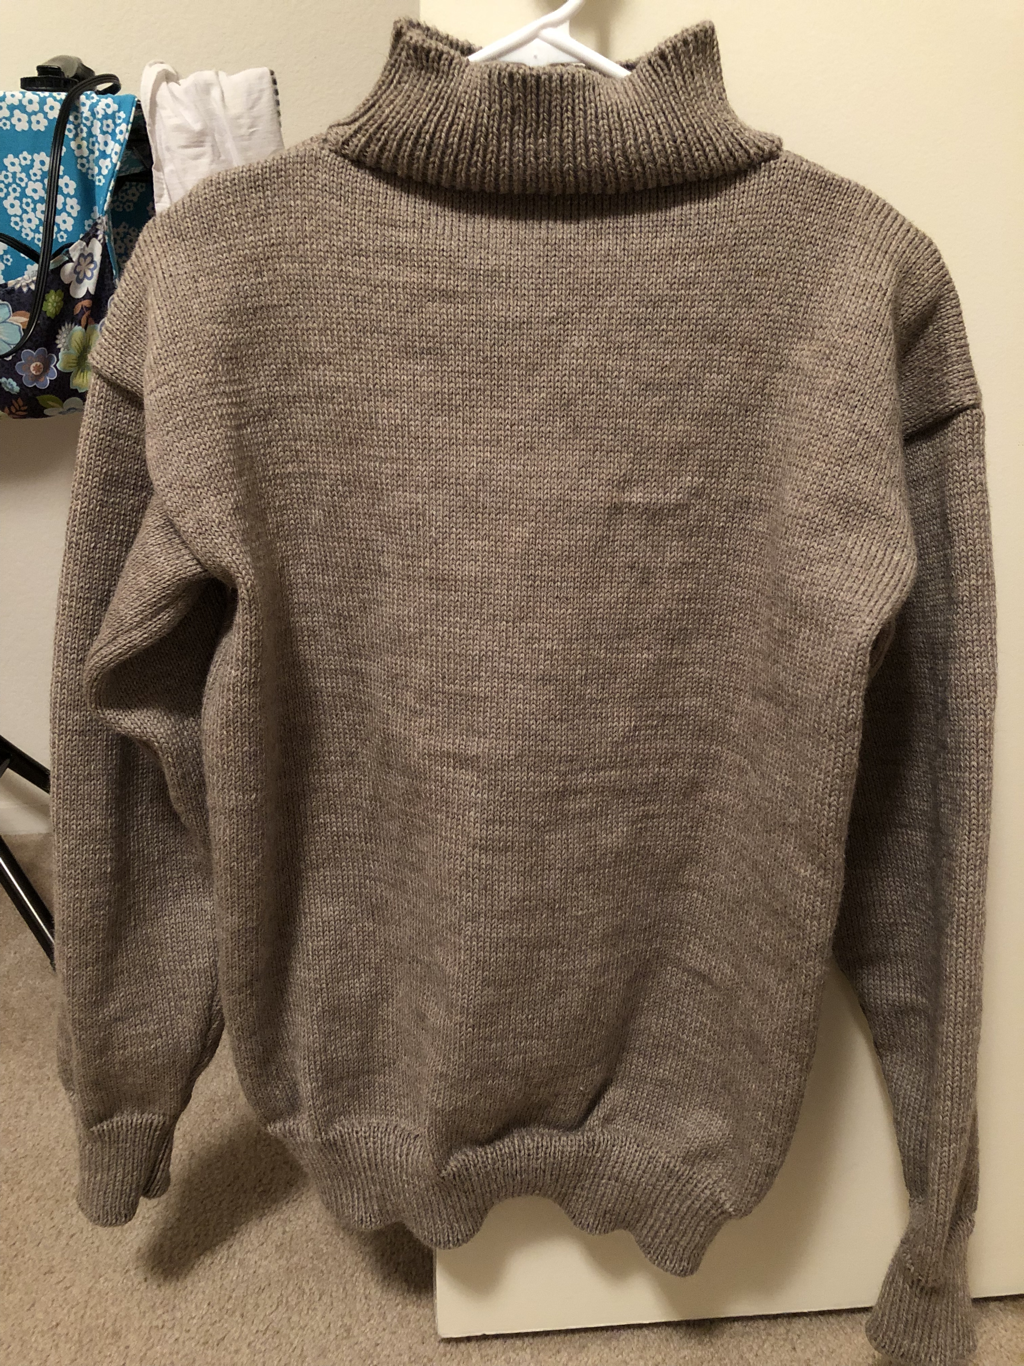 Handmade Reproduction WWI Great War Sweater